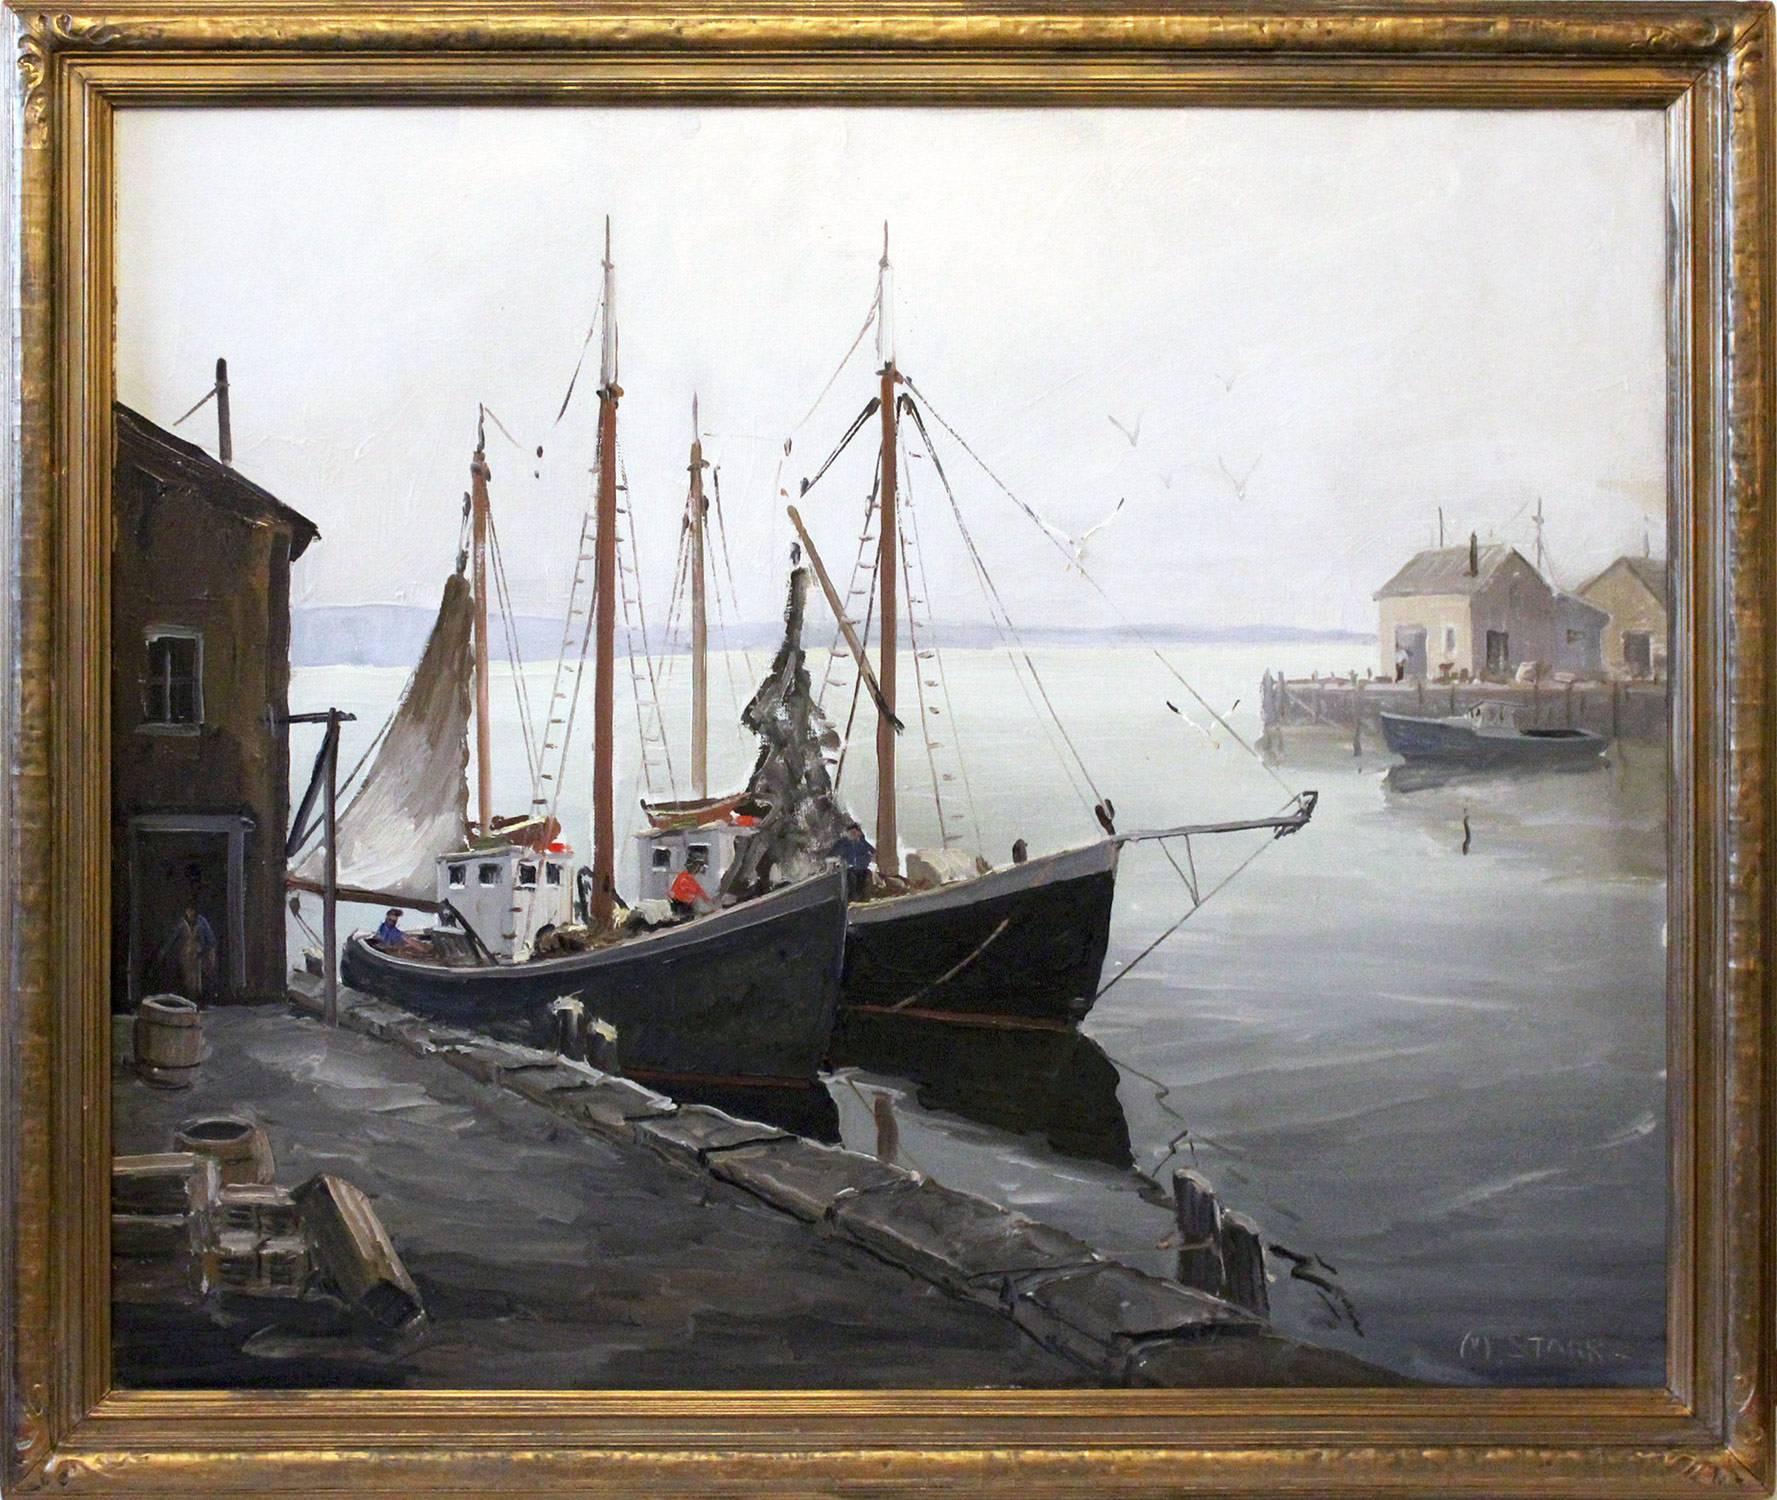 Melville F. Stark Figurative Painting - Boats Docked by the Harbor